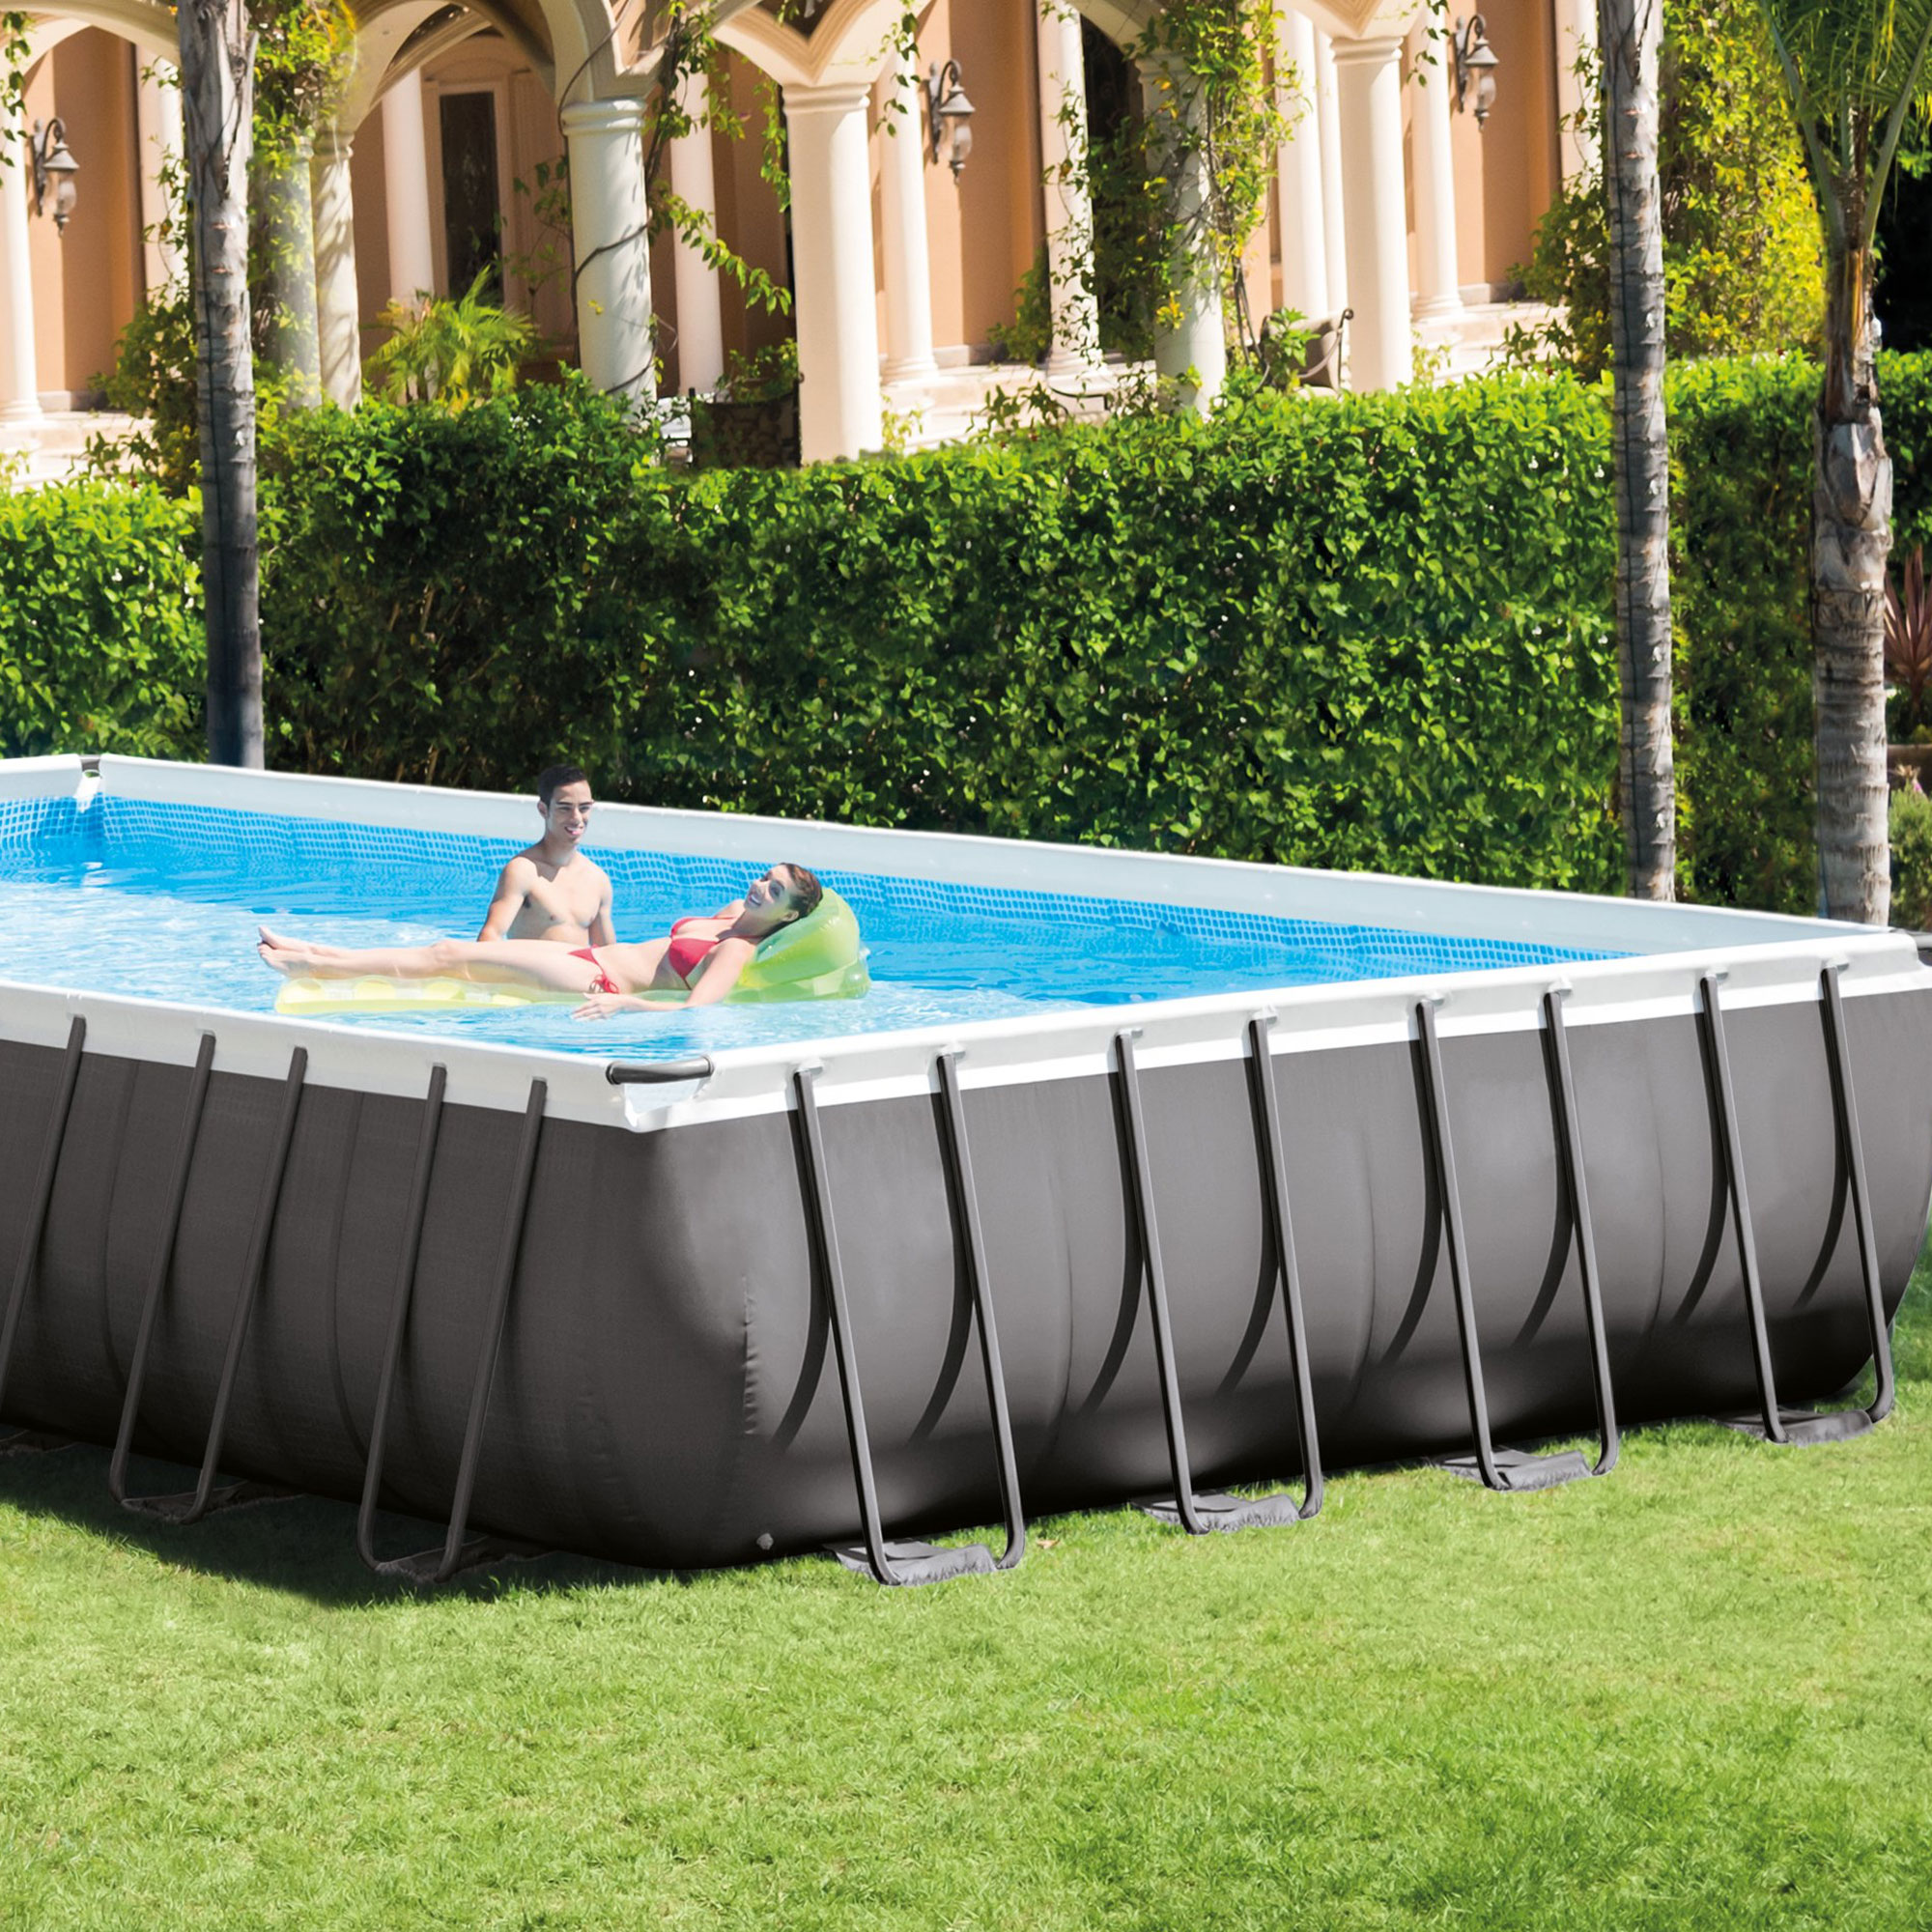 Creatice Above Ground Swimming Pool Set for Large Space